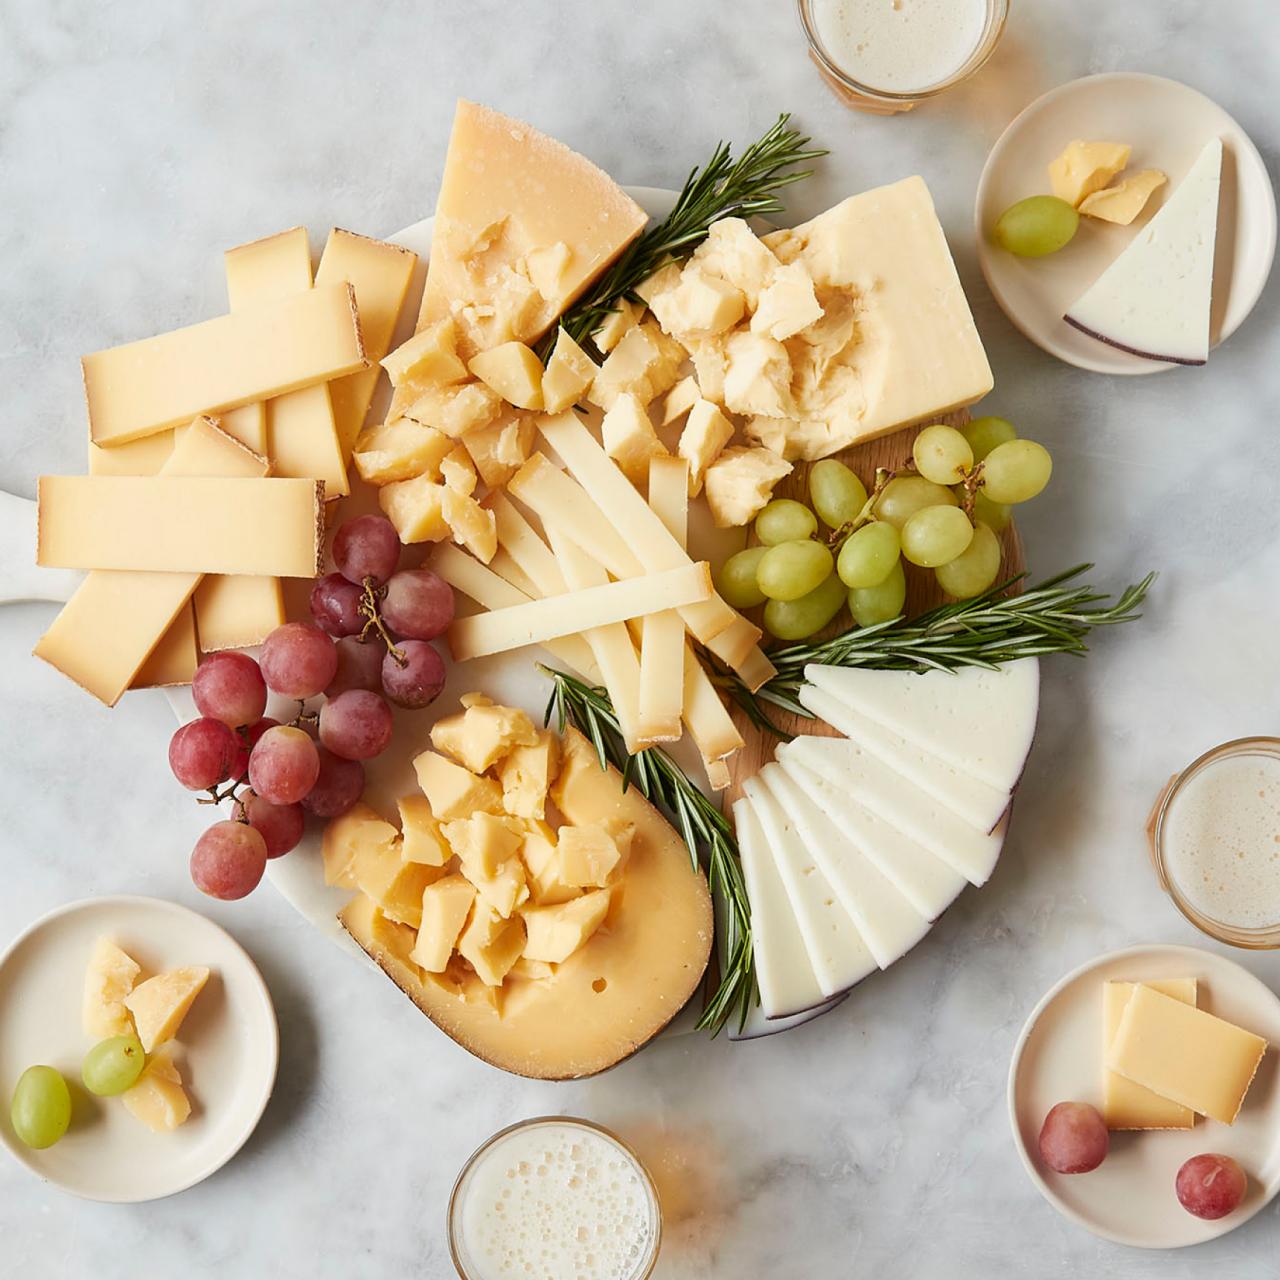 https://food.fnr.sndimg.com/content/dam/images/food/products/2023/10/31/rx_murrays_cheeses-of-the-world-sampler.jpeg.rend.hgtvcom.1280.1280.suffix/1698783648089.jpeg